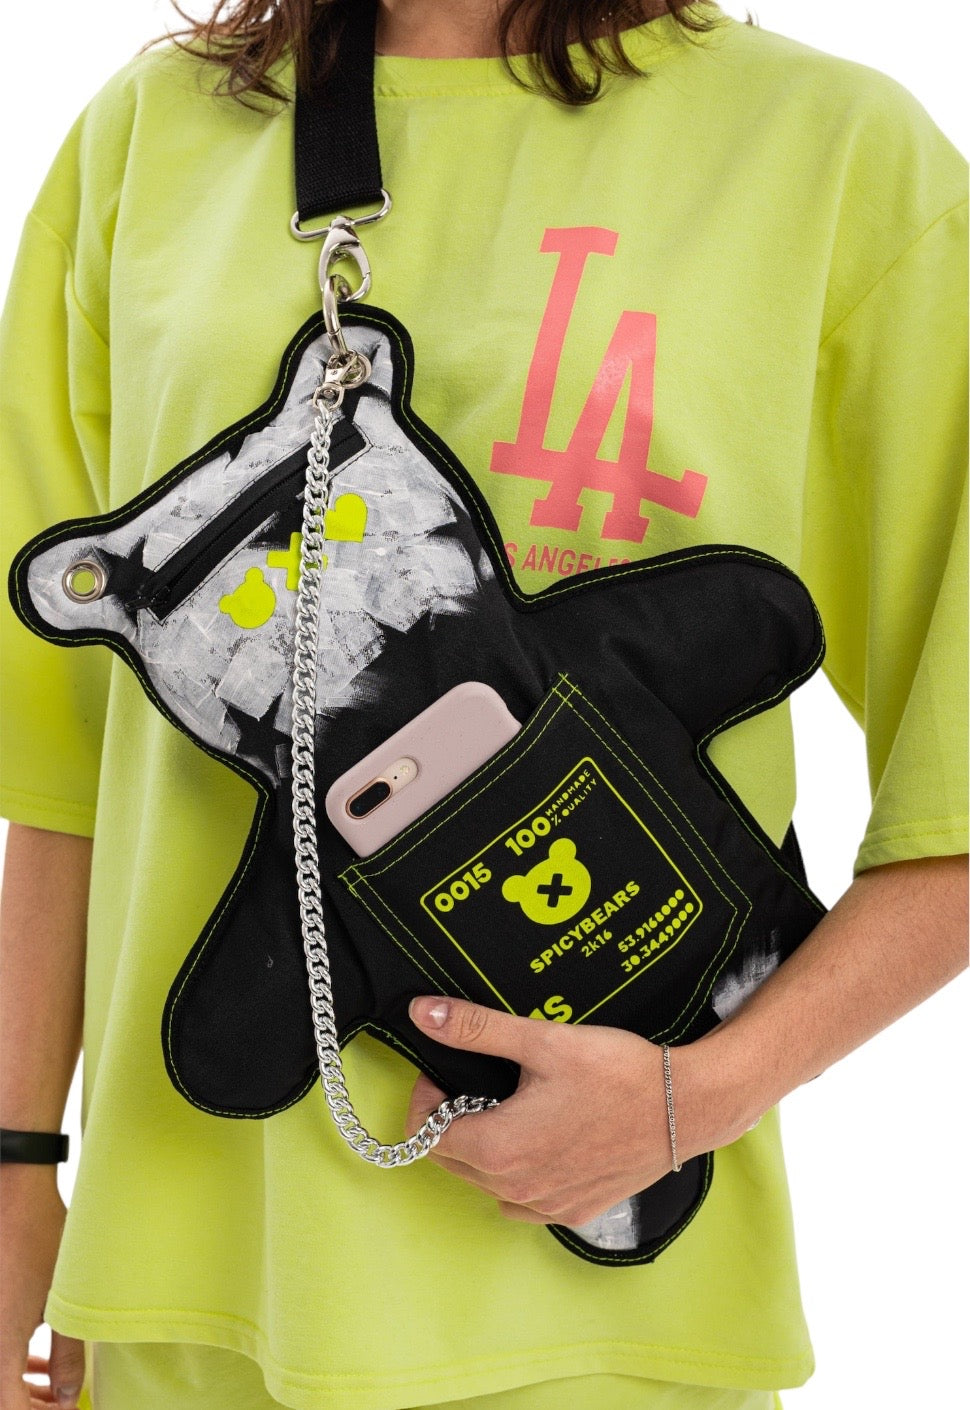 American Style Black & White | Neon Yellow SPICYBEARS Hand-Painted Purse - SPICYBEARS